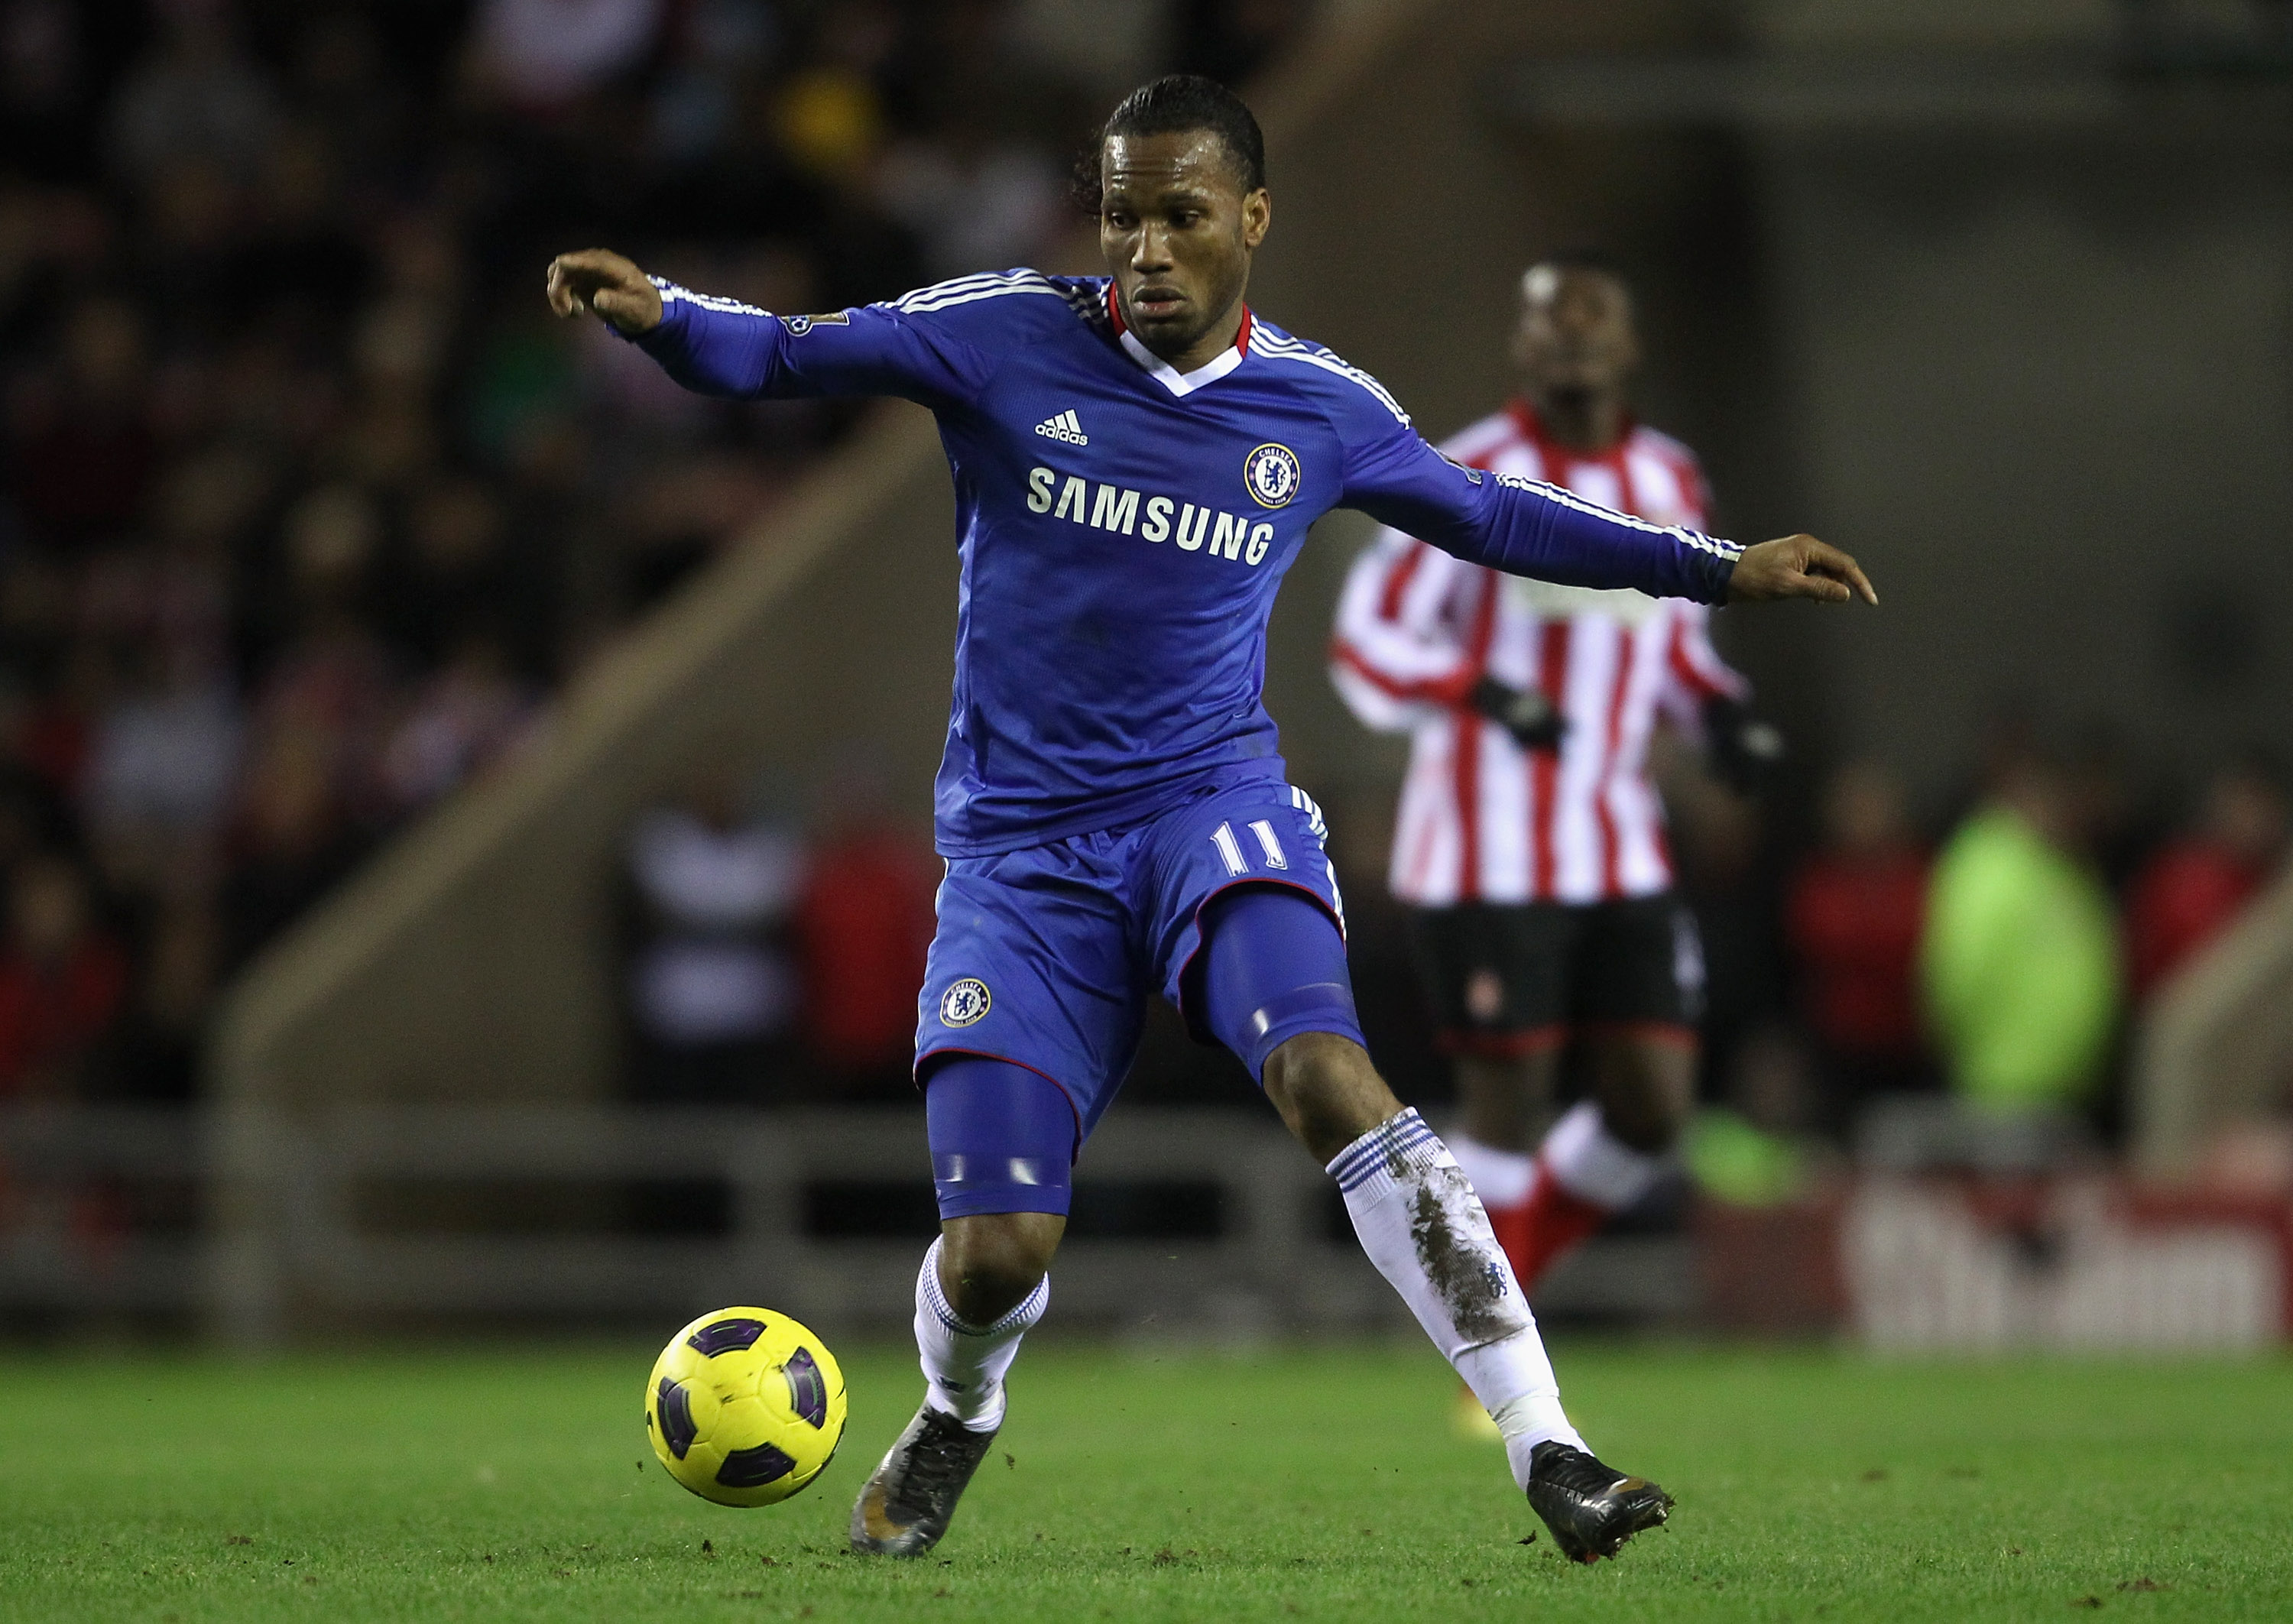 SUNDERLAND, ENGLAND - FEBRUARY 01:  Didier Drogba of Chelsea runs with the ball during the Barclays Premier League match between Sunderland and Chelsea at the Stadium of Light on February 1, 2011 in Sunderland, England.  (Photo by Scott Heavey/Getty Image